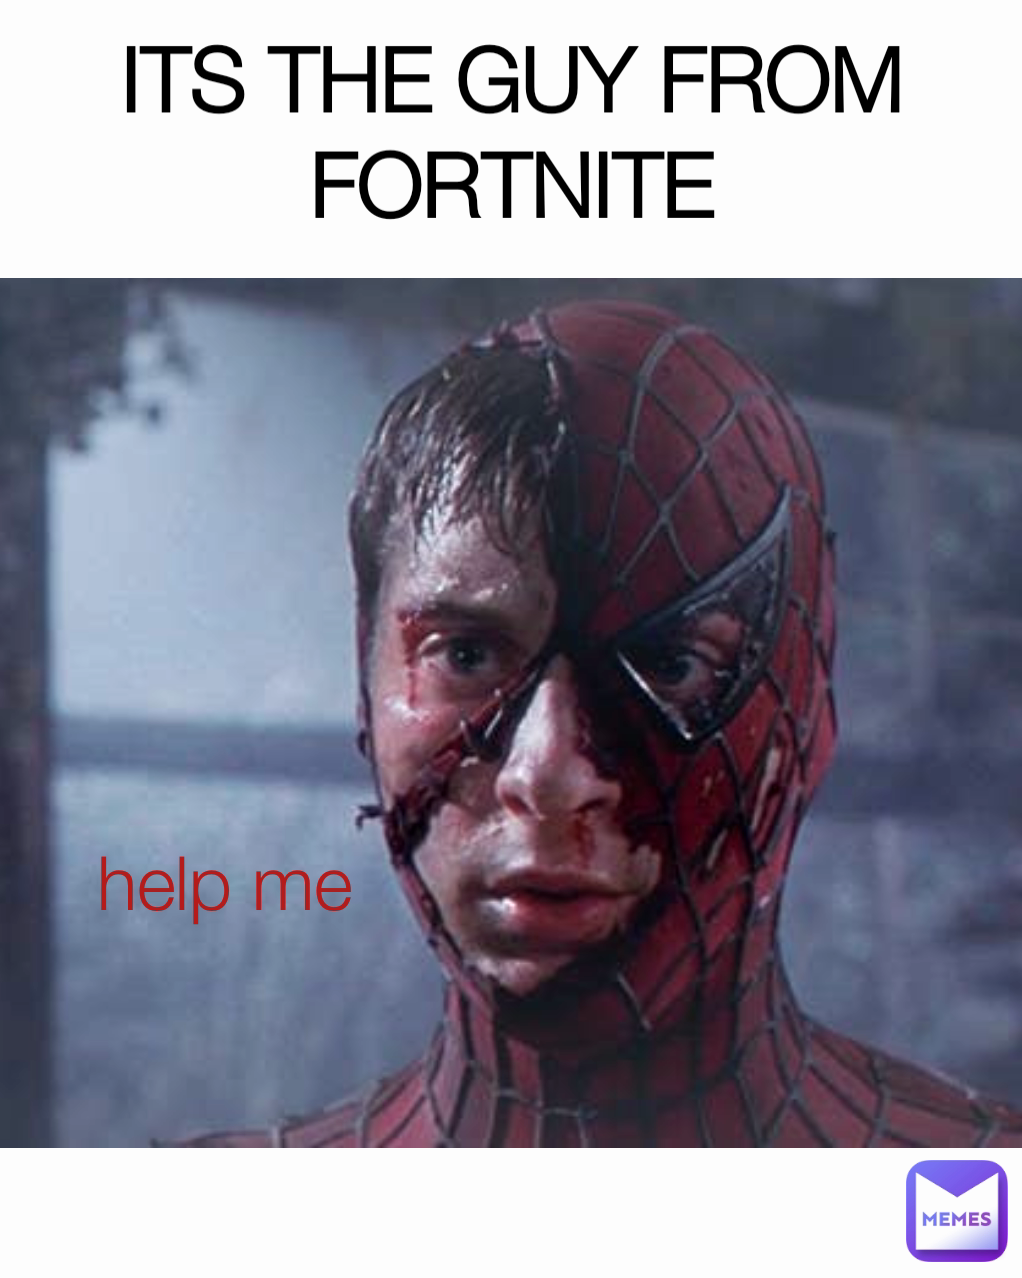 help me ITS THE GUY FROM FORTNITE